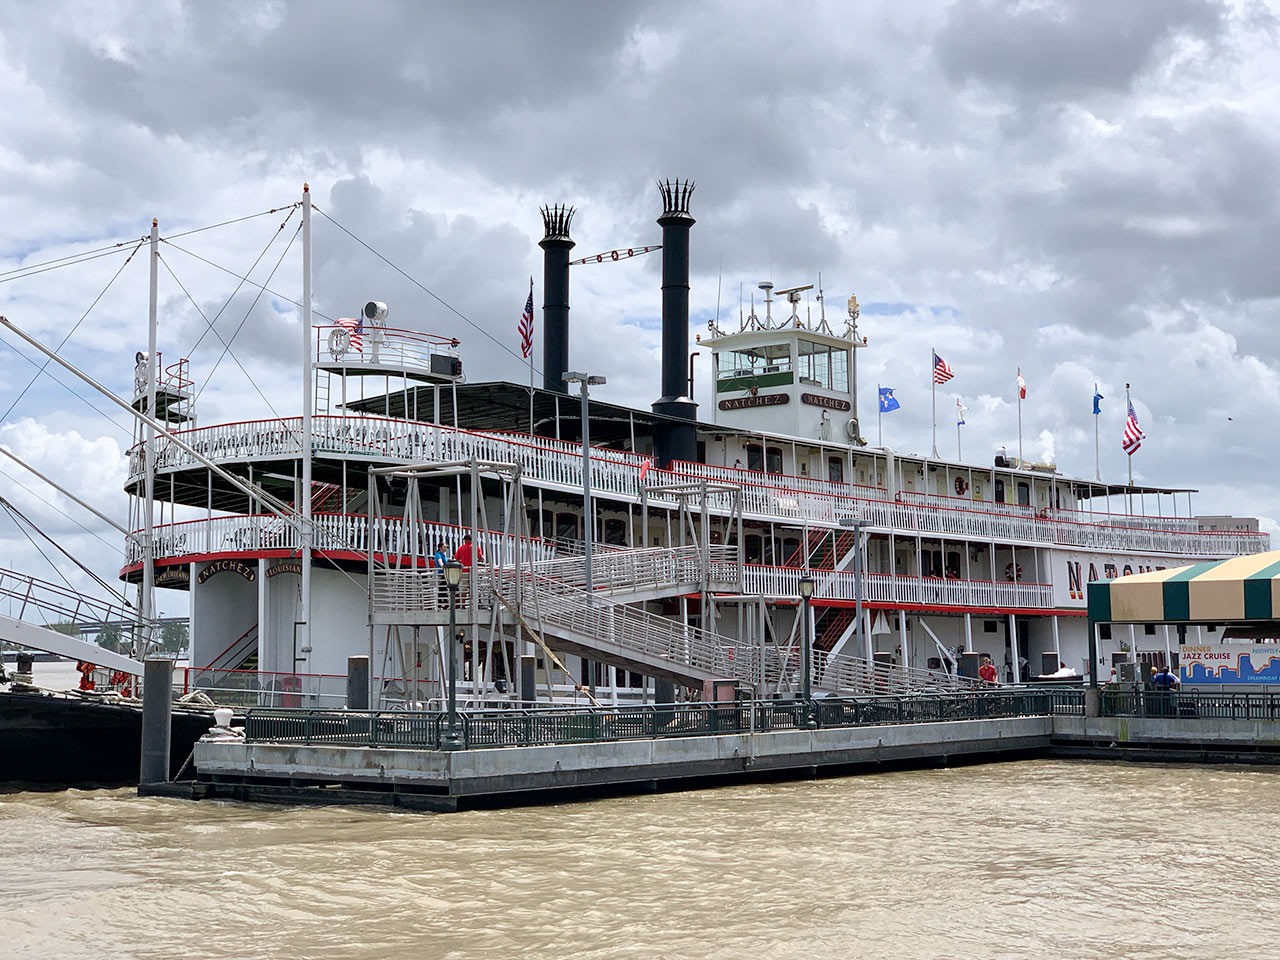 sideview of the steamboat natchez